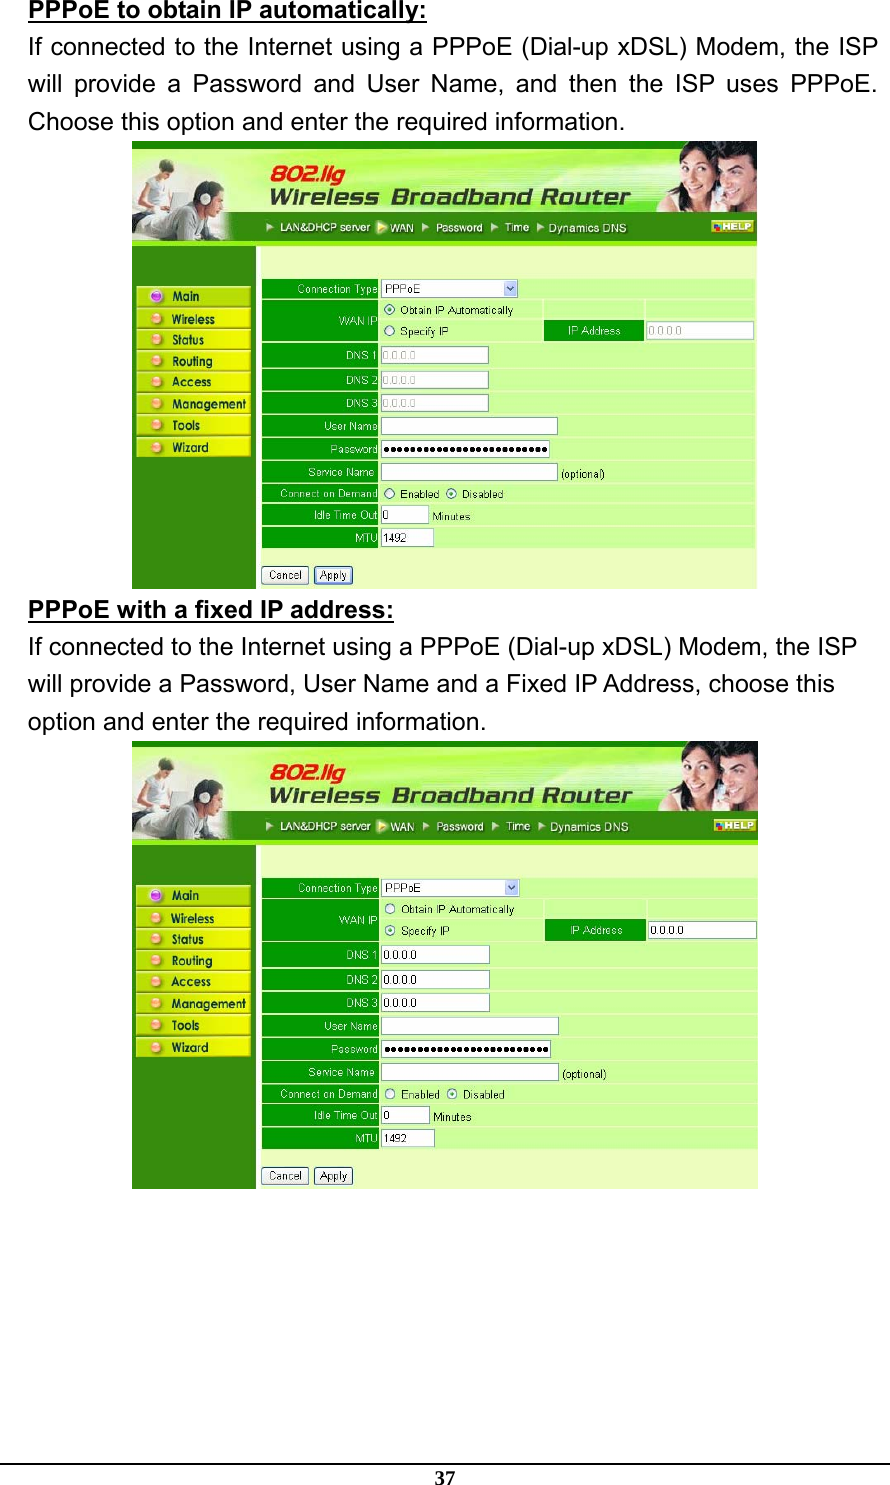 37 PPPoE to obtain IP automatically: If connected to the Internet using a PPPoE (Dial-up xDSL) Modem, the ISP will provide a Password and User Name, and then the ISP uses PPPoE. Choose this option and enter the required information.  PPPoE with a fixed IP address: If connected to the Internet using a PPPoE (Dial-up xDSL) Modem, the ISP will provide a Password, User Name and a Fixed IP Address, choose this option and enter the required information.  